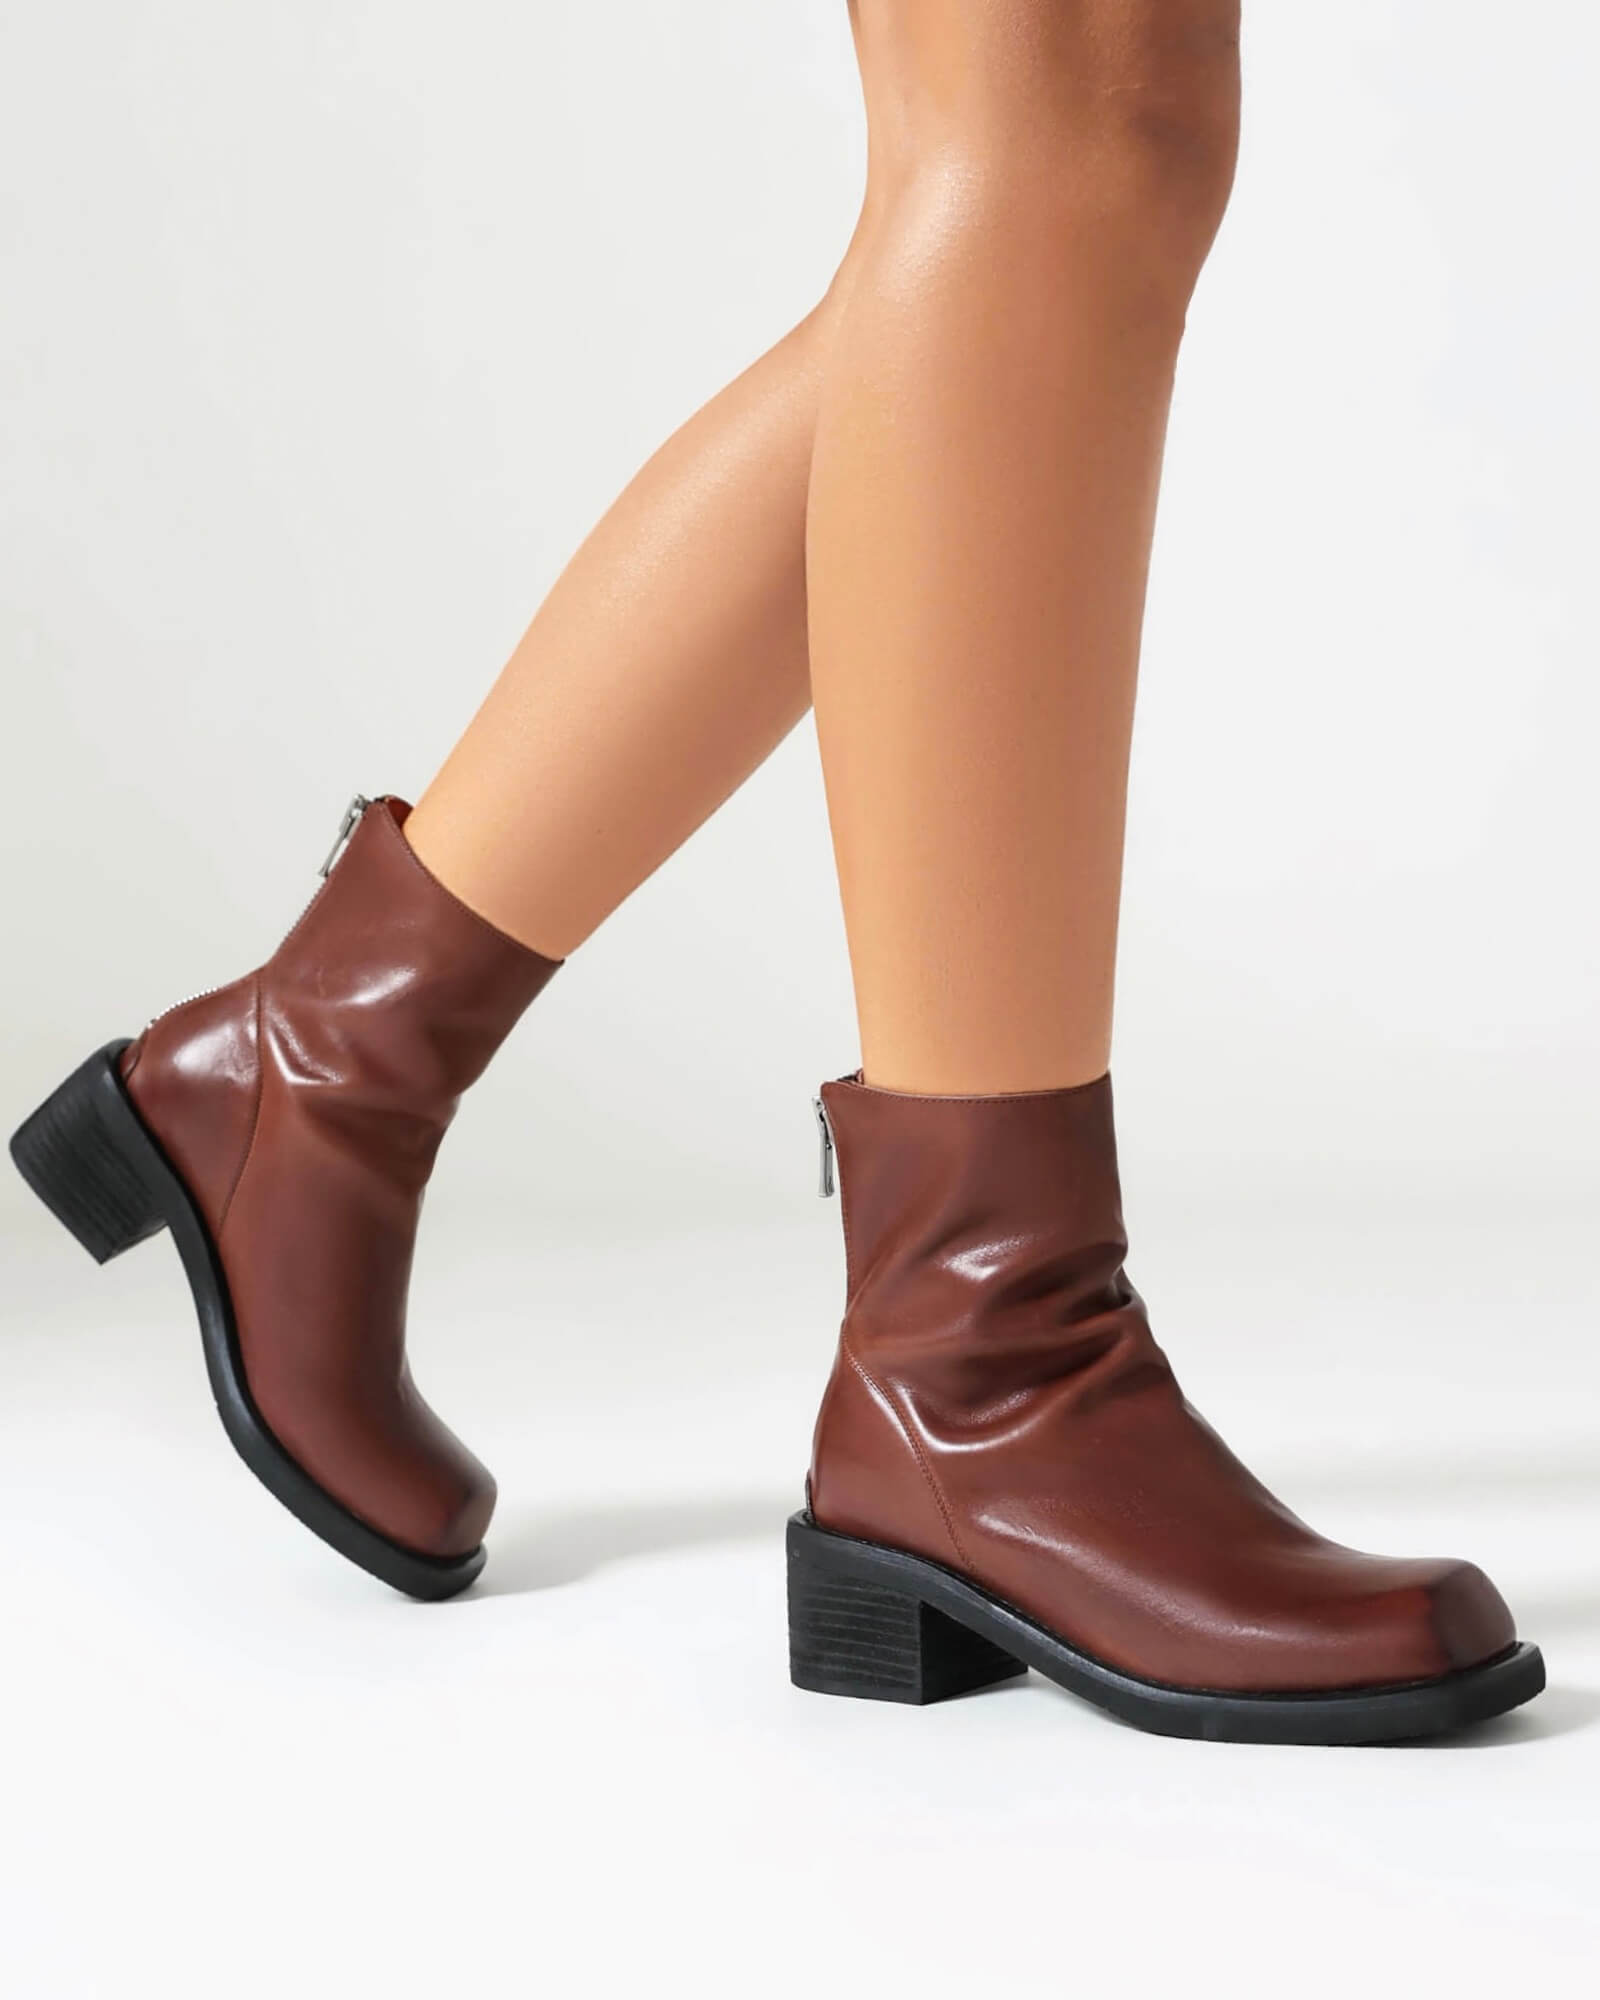 Vefa-Square-Toe-Brown-Leather-Boots-model-2